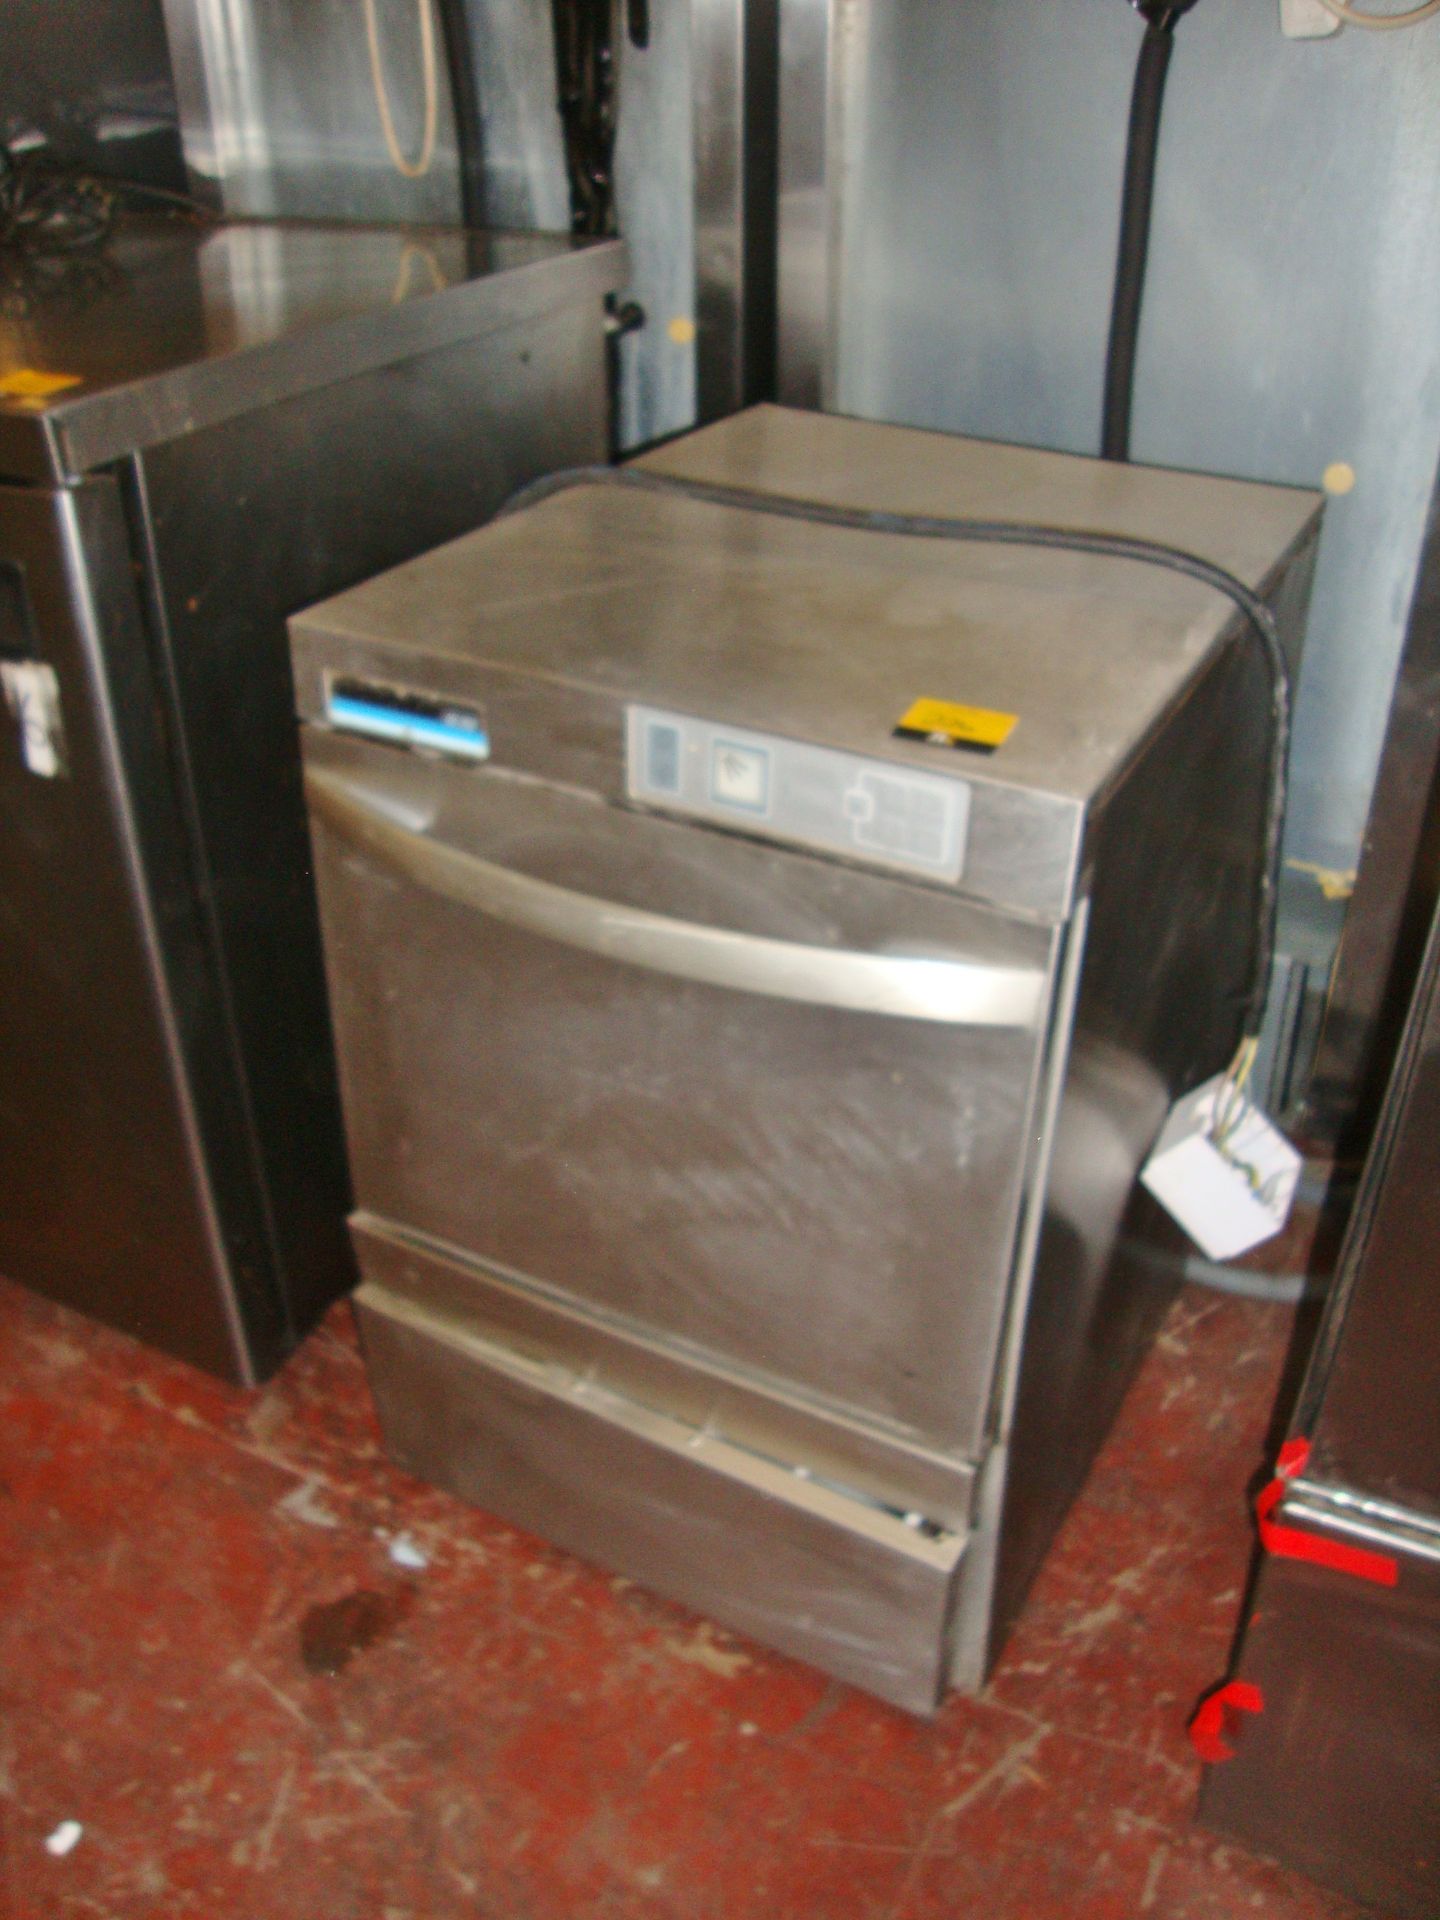 Winterhalter GS202 compact glass washer - Image 2 of 3